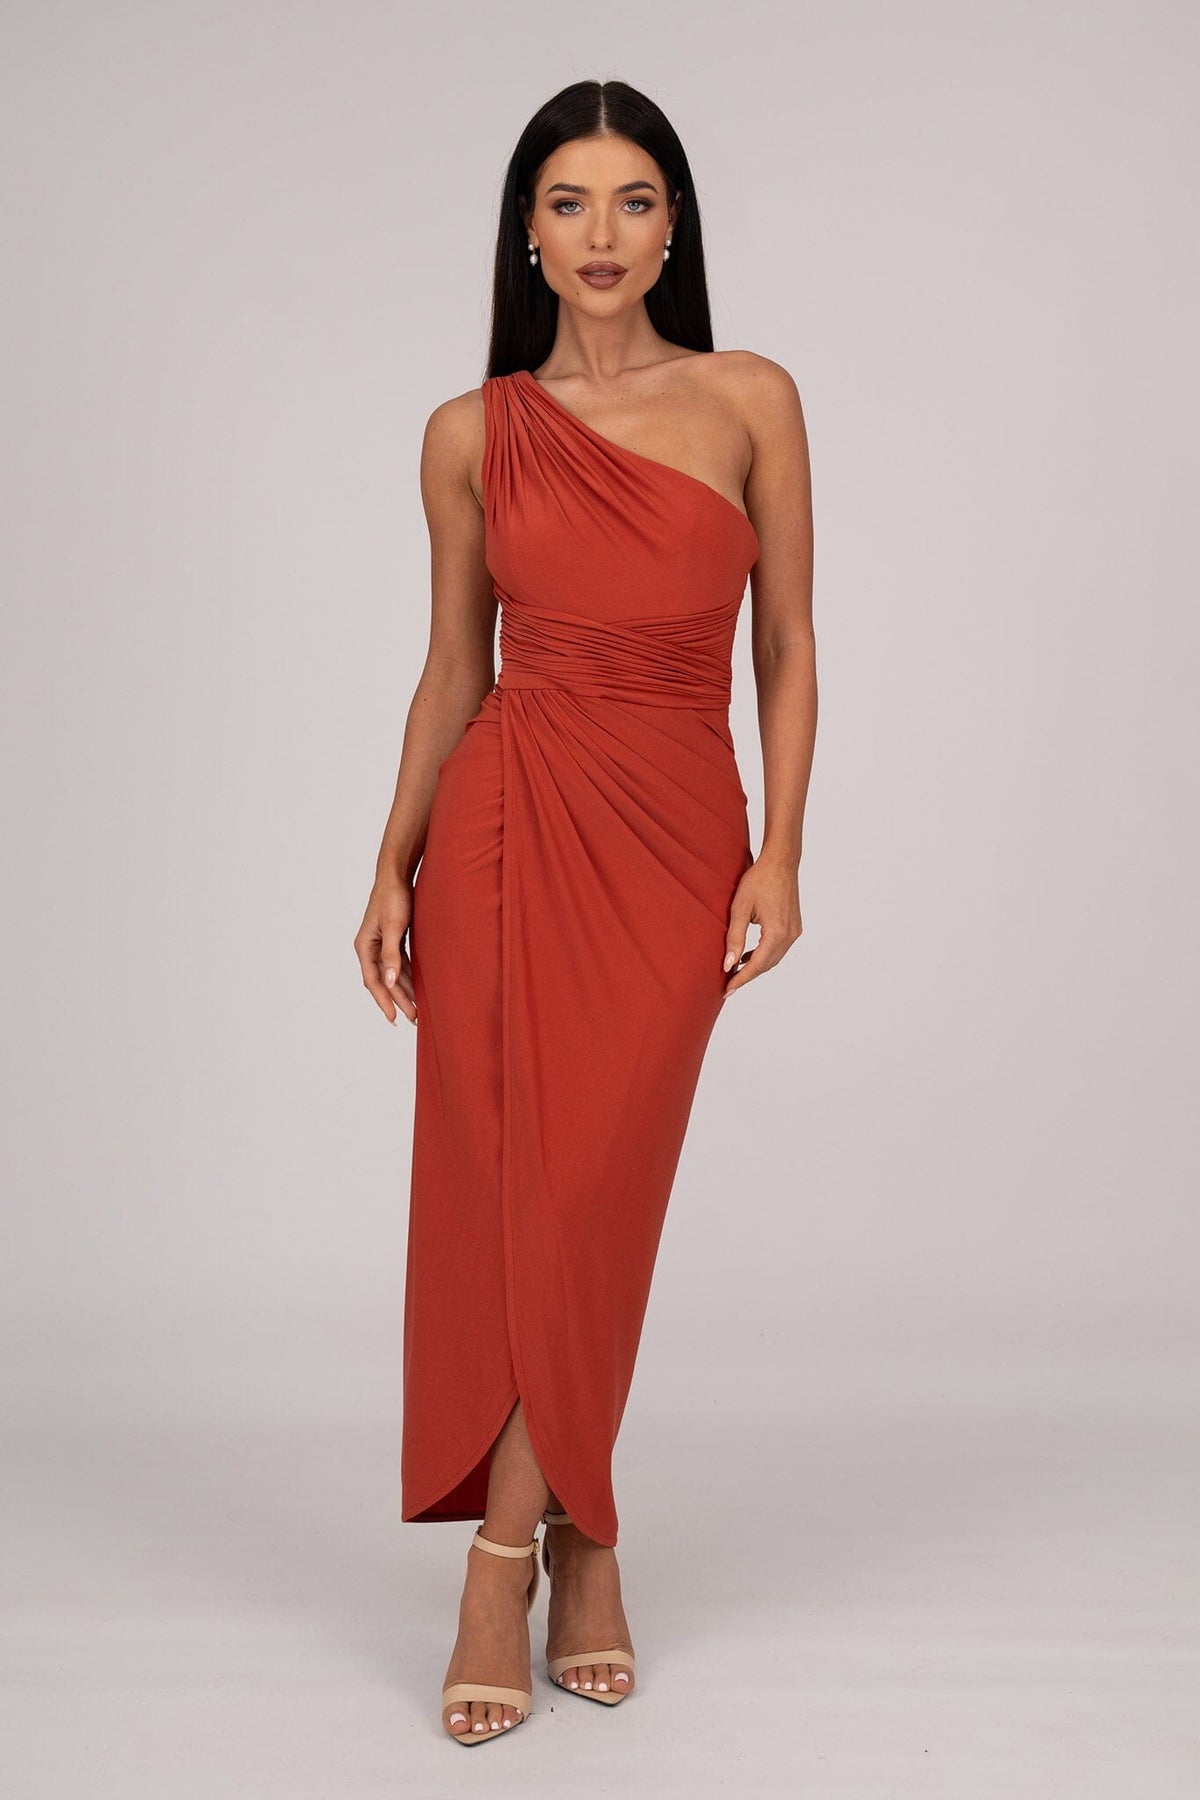 Full Frontal Image of Burnt Orange Midi Dress with One Shoulder Neckline, Faux-wrap Front Design and Asymmetrical Skirt with Centre Front Split